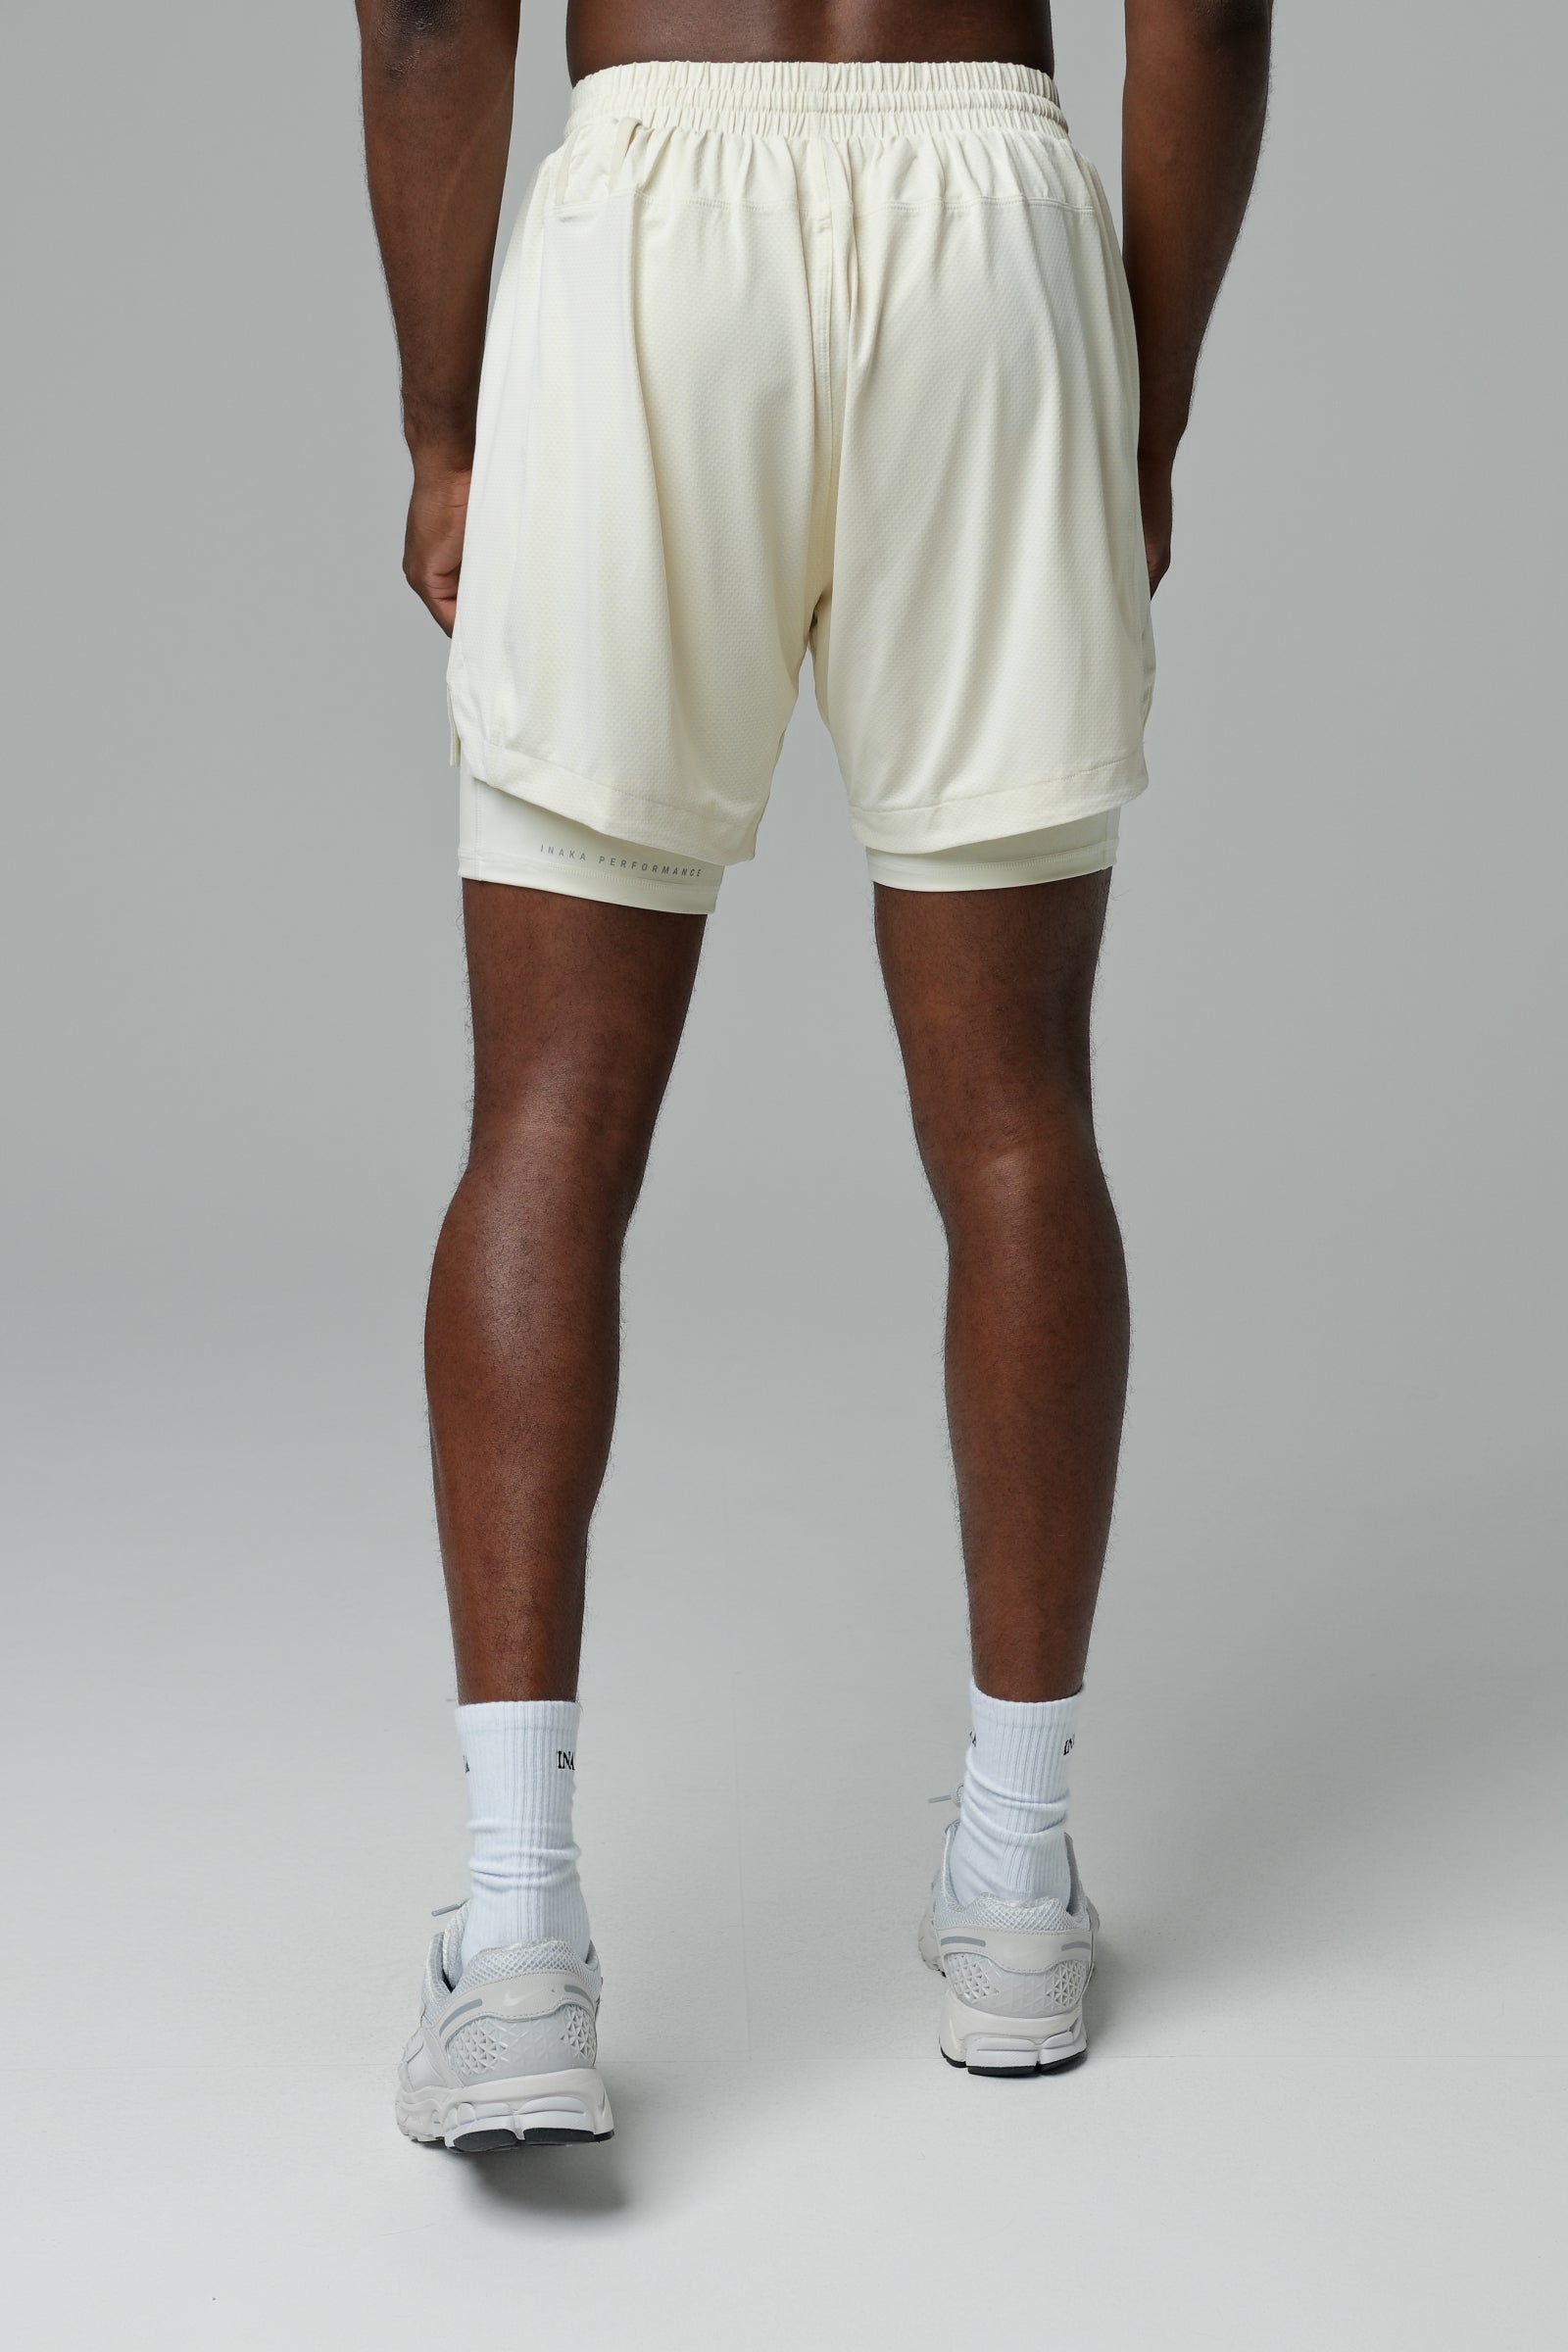 CoreLite Shorts Lined - Off White